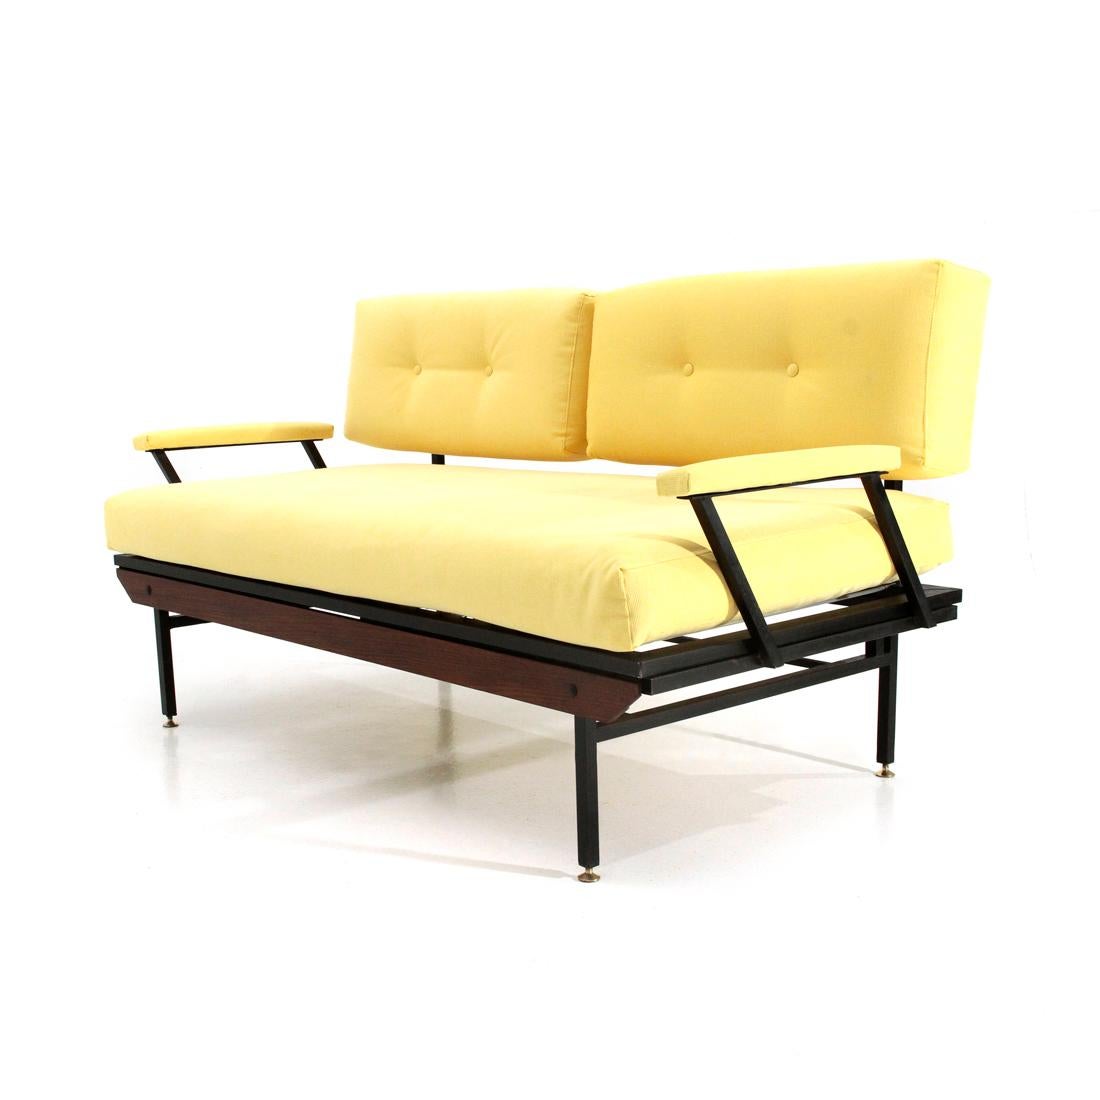 Italian Midcentury Sofa Bed in Yellow Fabric, 1950s In Good Condition For Sale In Savona, IT